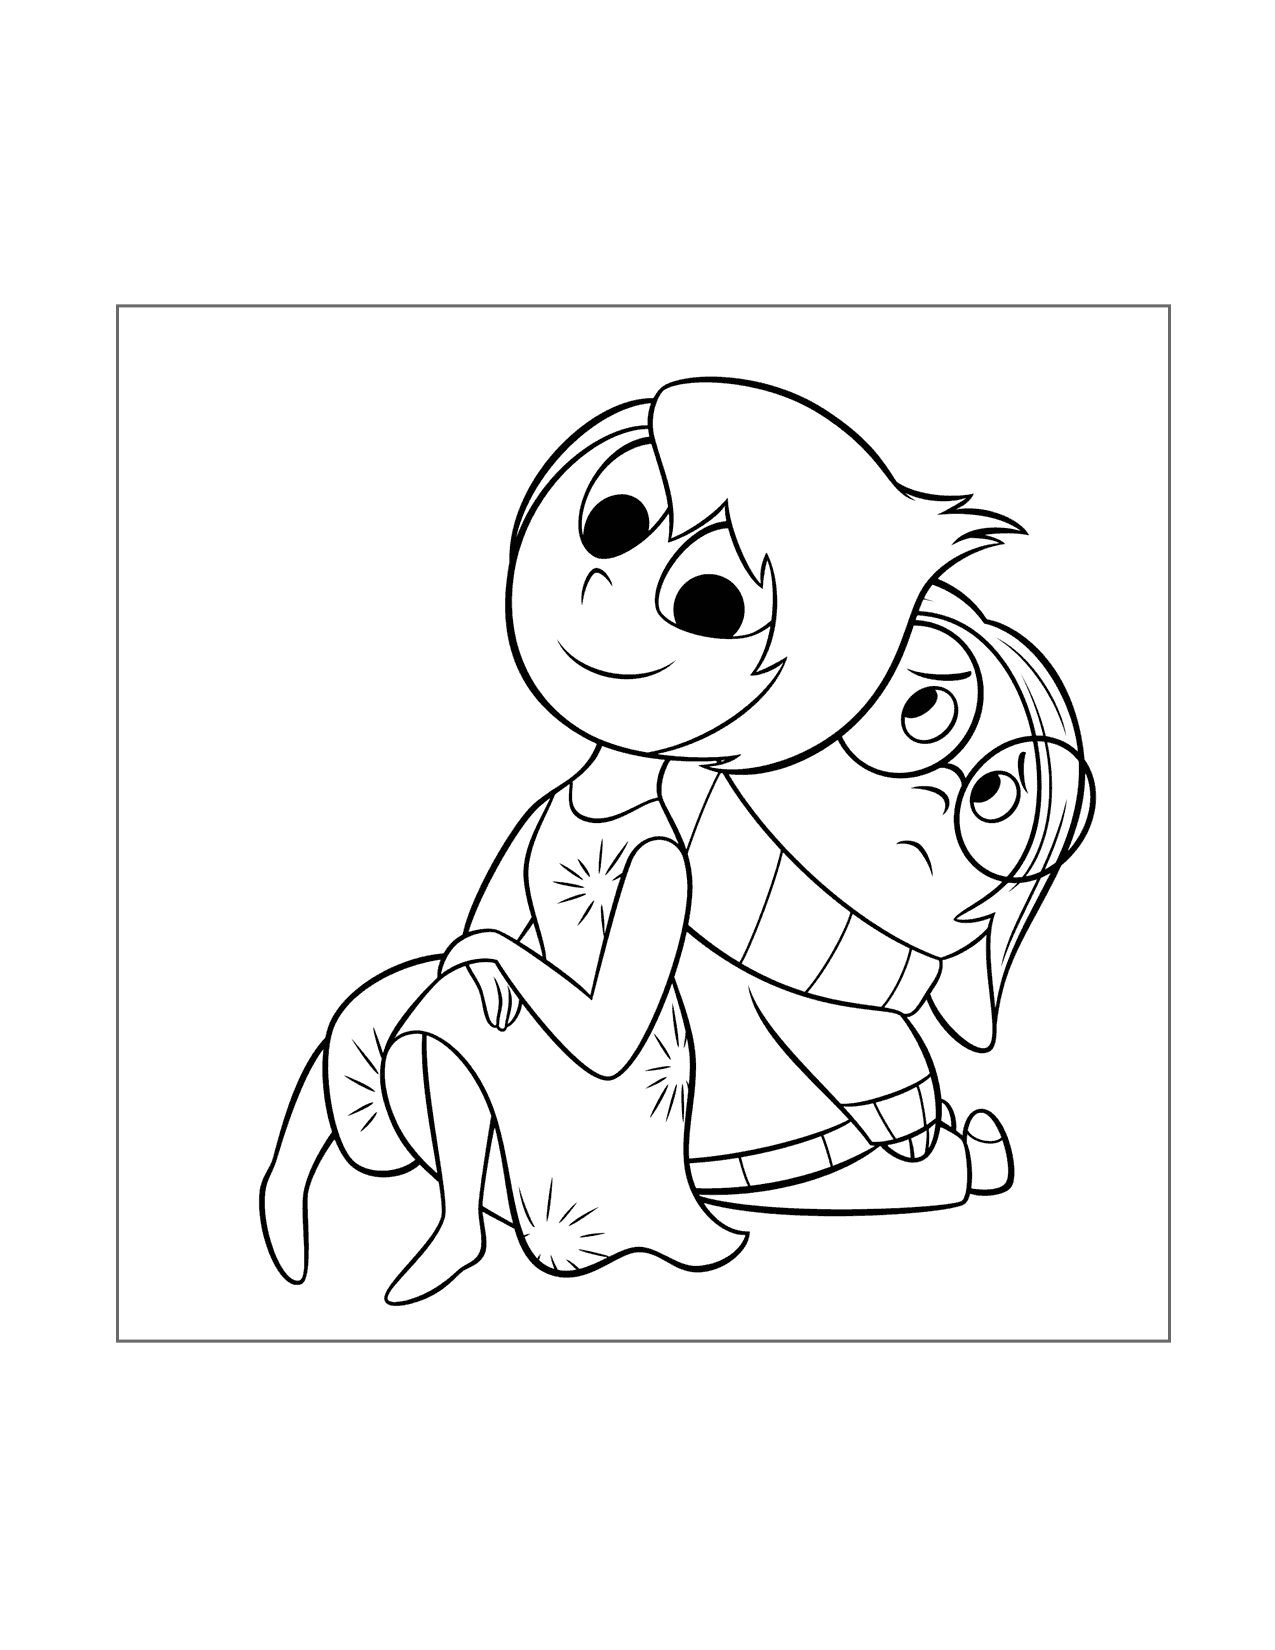 Joy And Sadness Inside Out Coloring Page